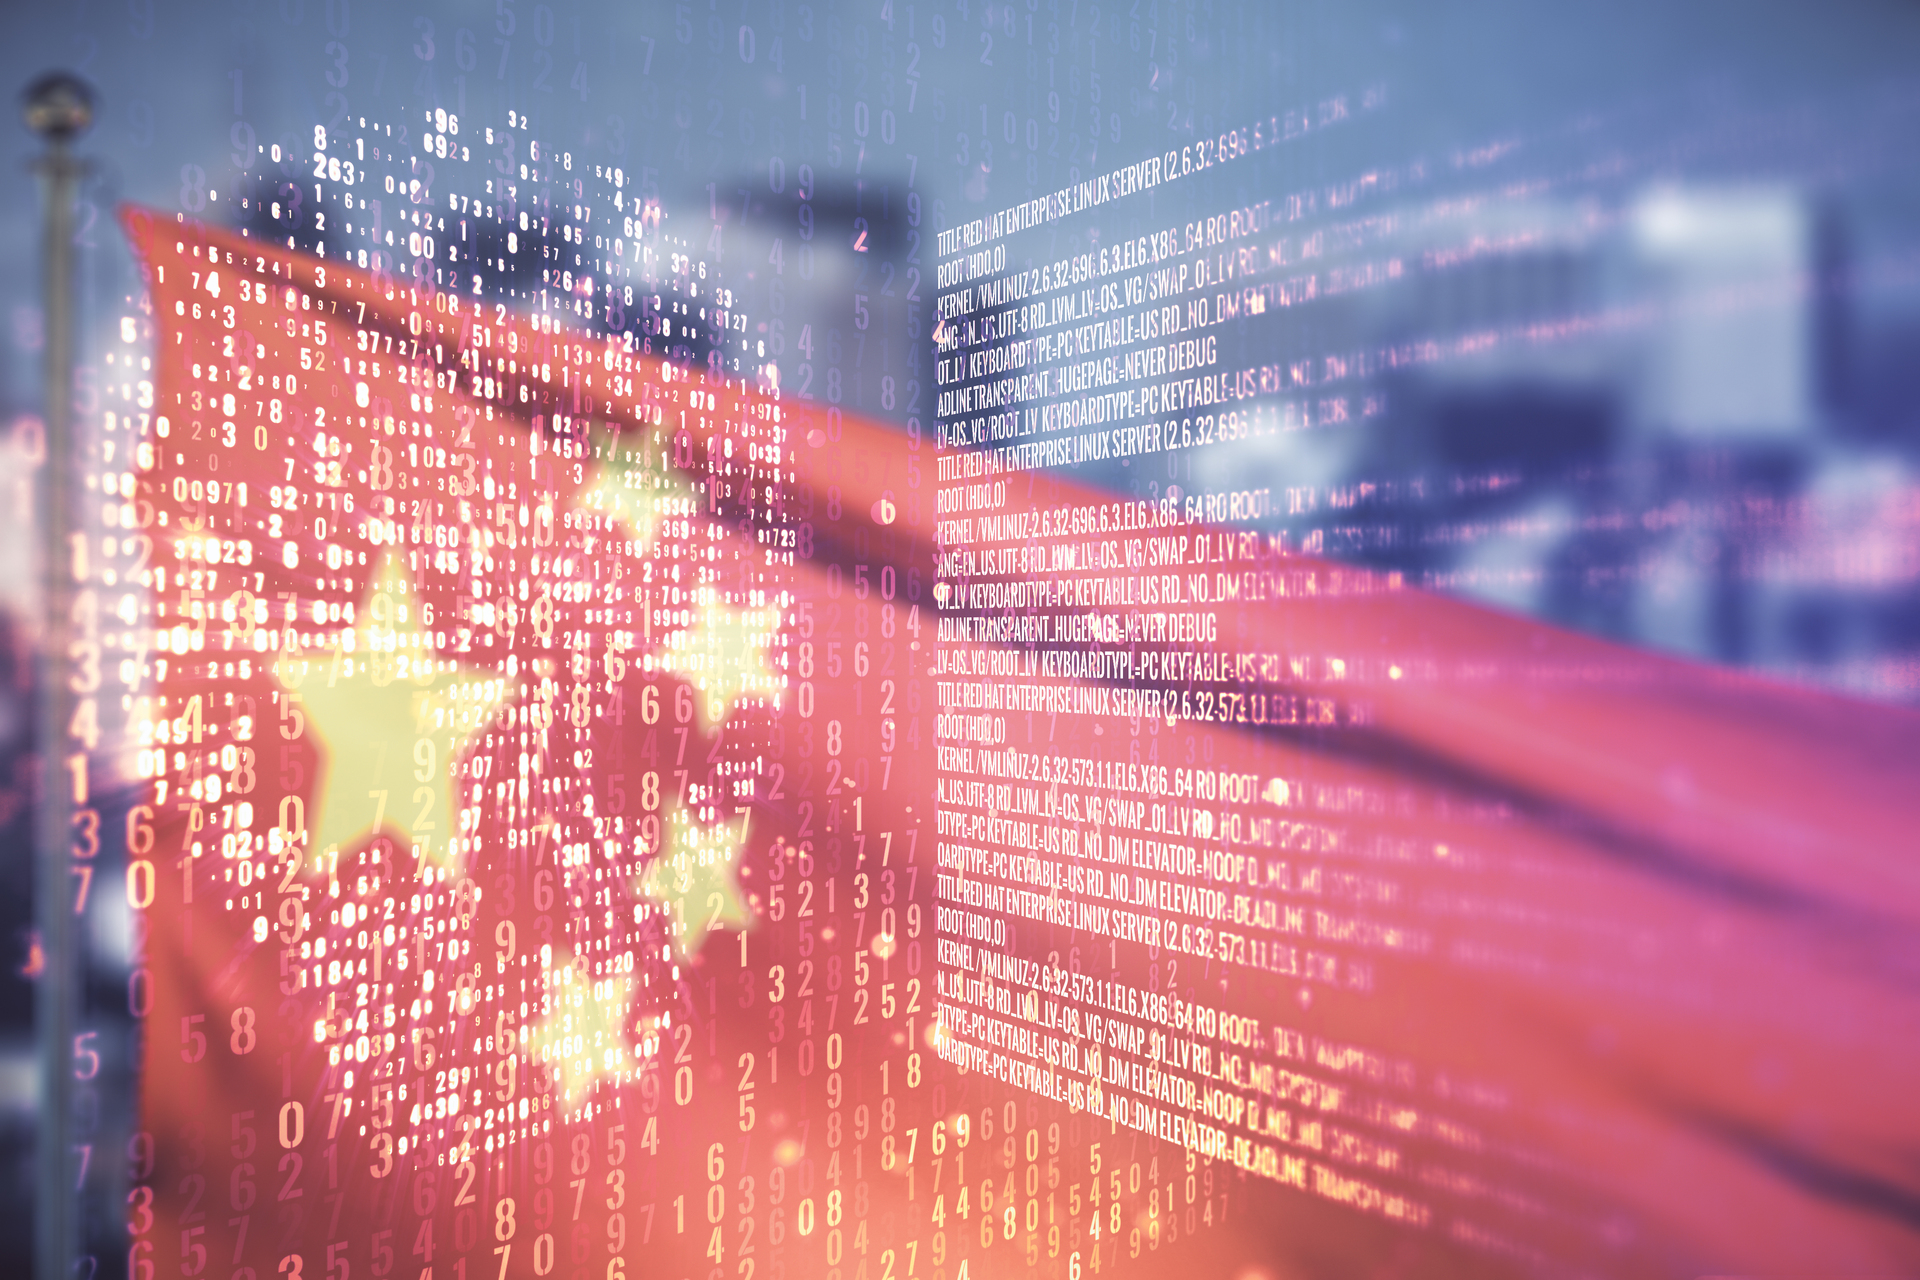 China: Possible police database breach exposes at least 1 billion